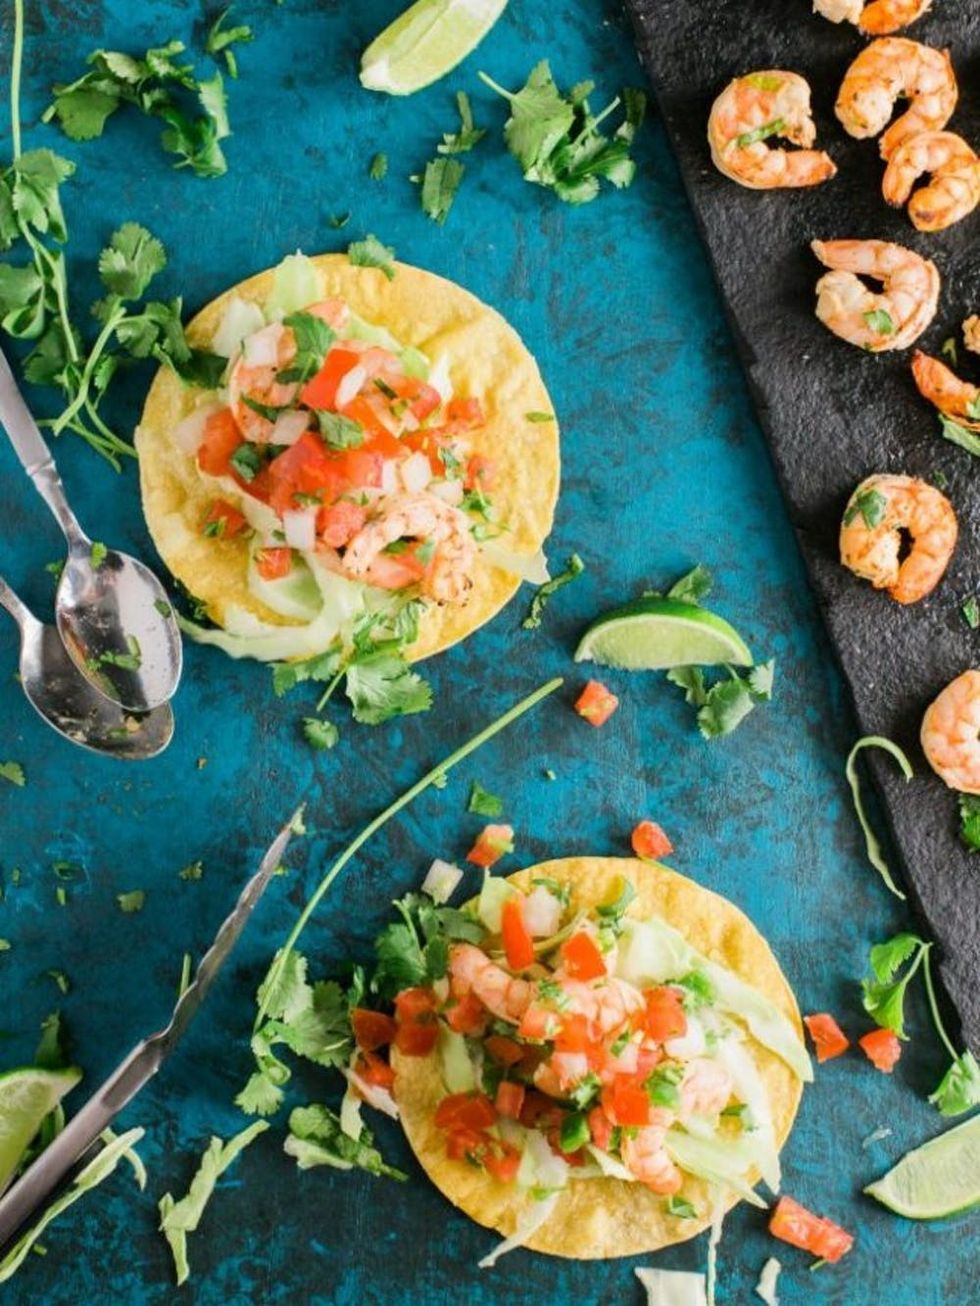 12 Glorious Grilled Tacos for This Summer’s Tuesdays - Brit + Co